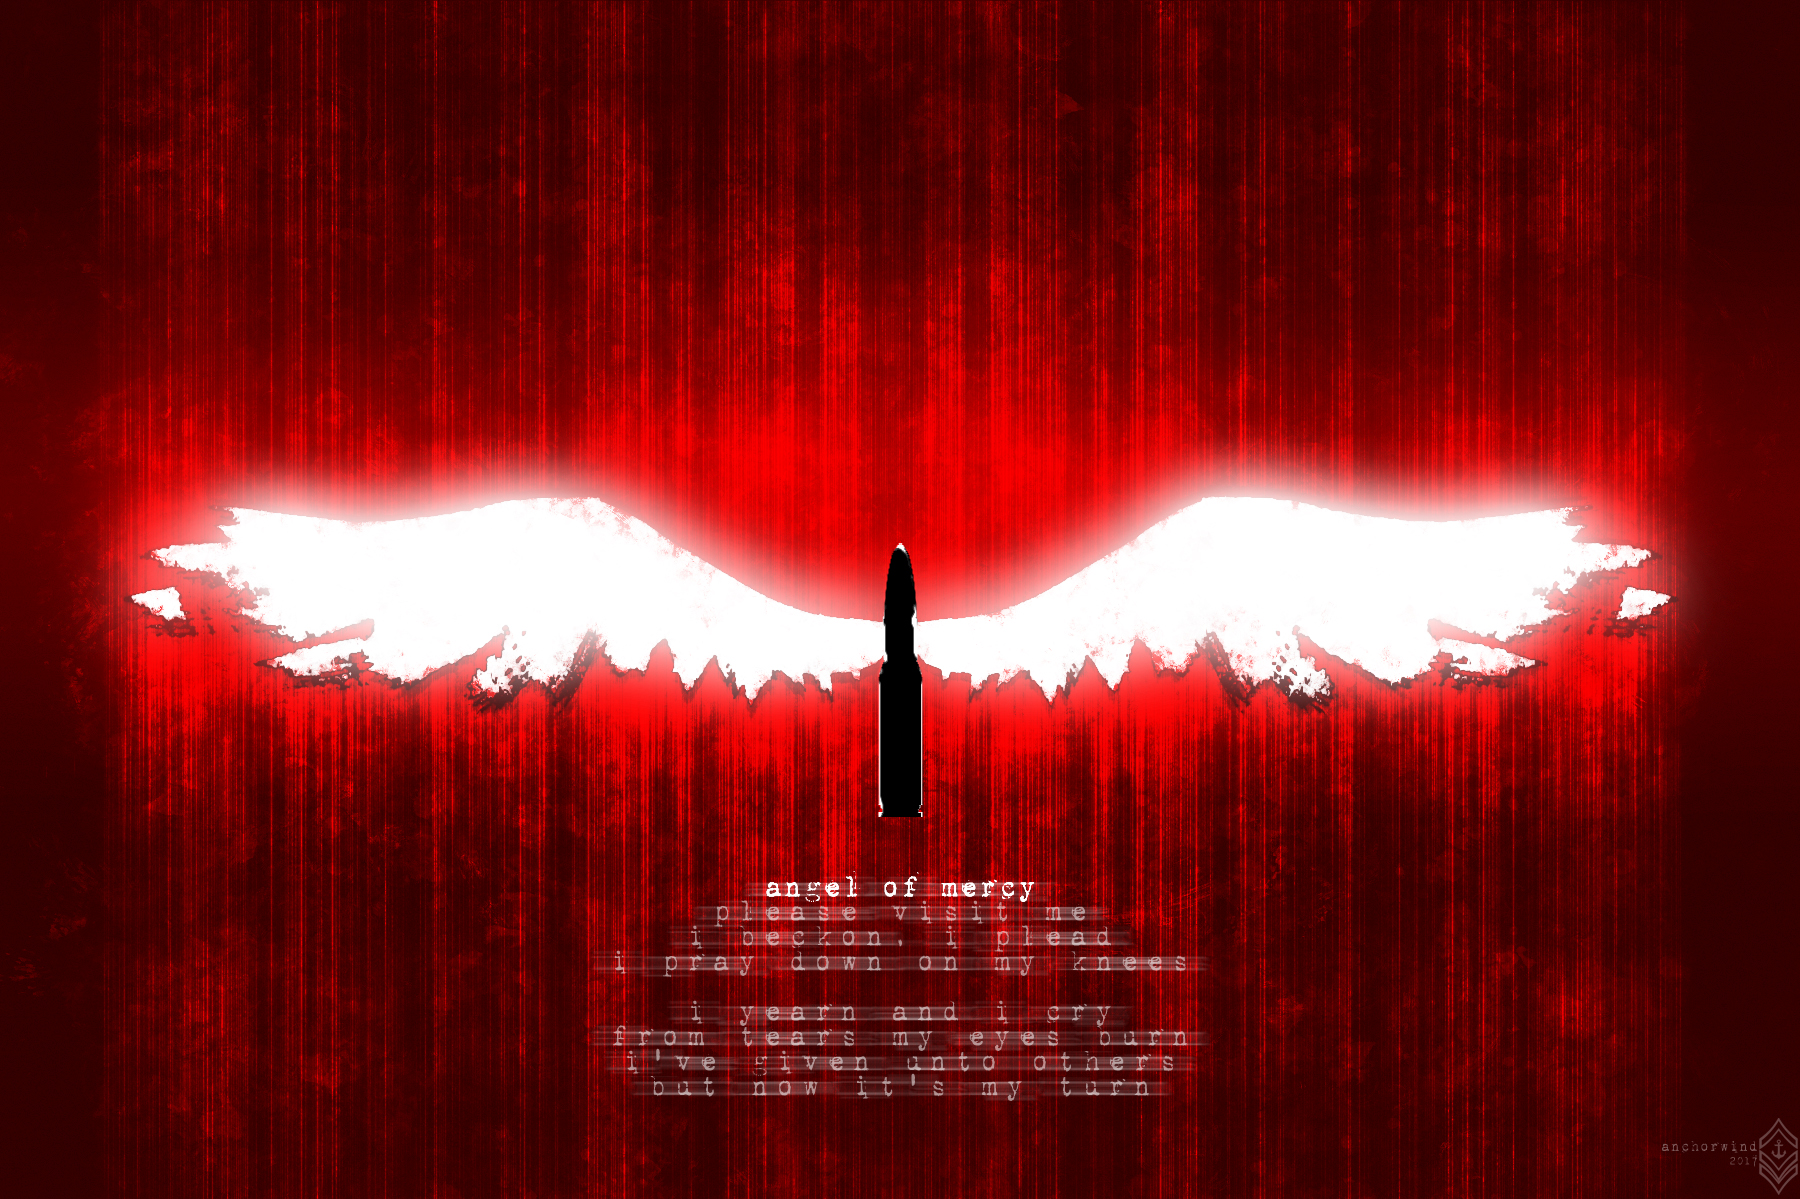 AngelofMercy:A Digital Art piece by Anchorwind, a disabled OIF/OEF Veteran artist, writer, and audio tinkerer.